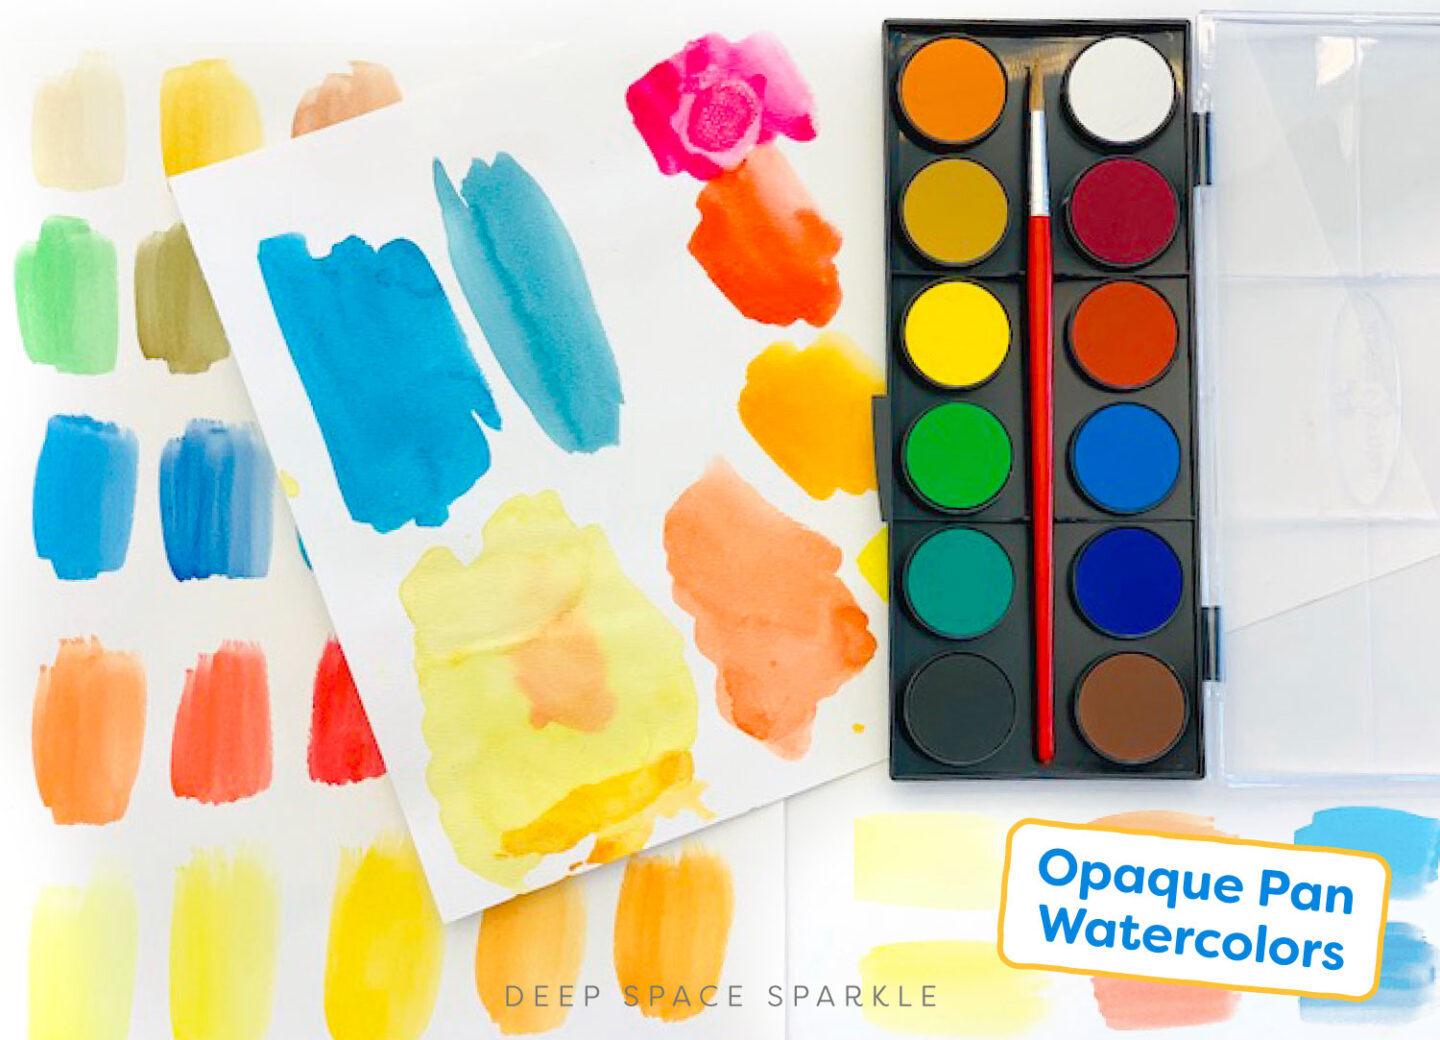 Opaque Pan The Top 5 Watercolor, Colored Pencil and Crayon Sets for Kids